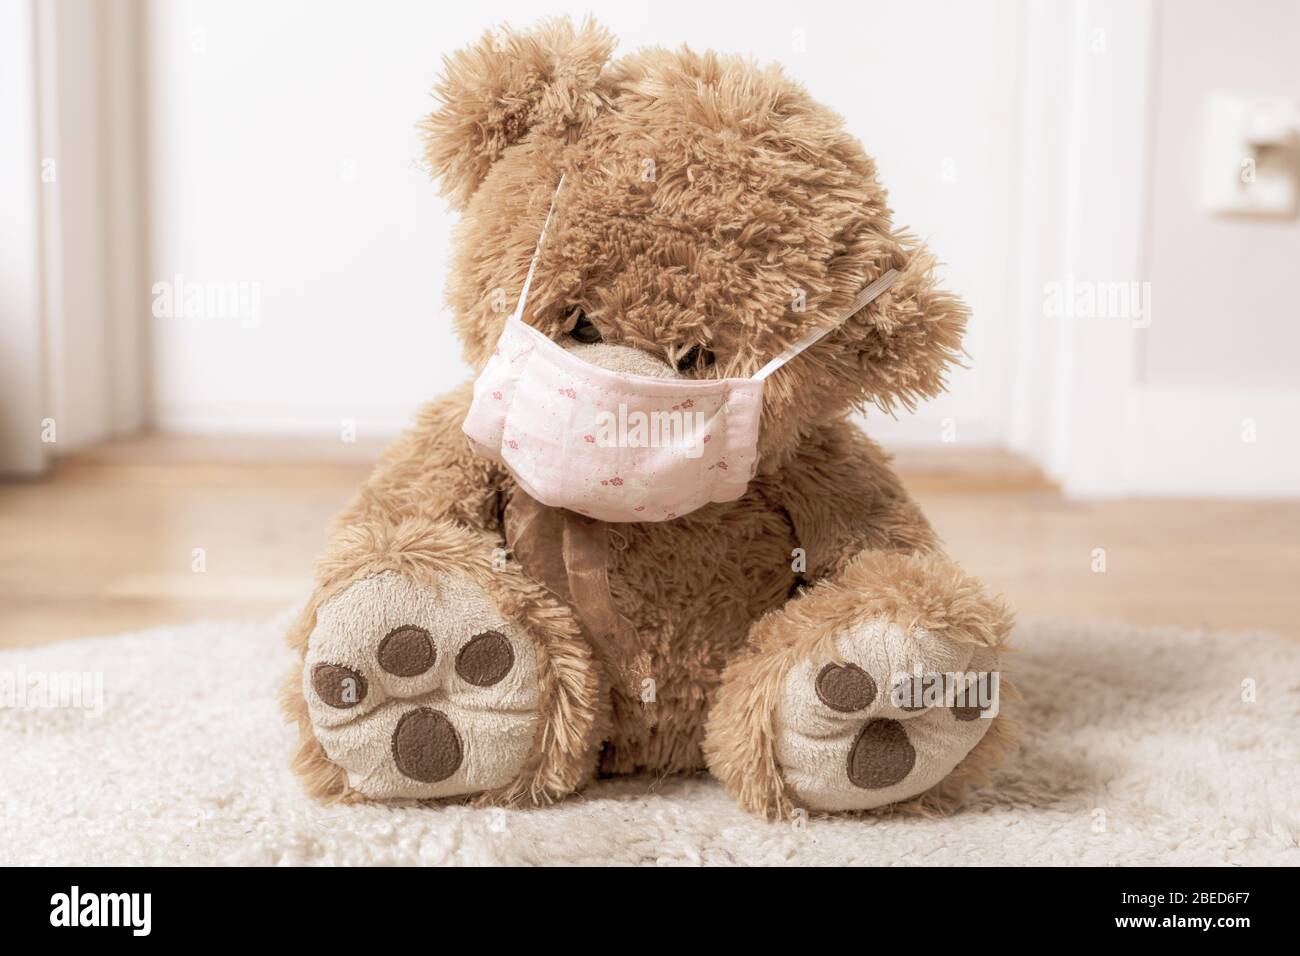 teddybear with a homemade covid 19 protection mask sitting on the floor Stock Photo